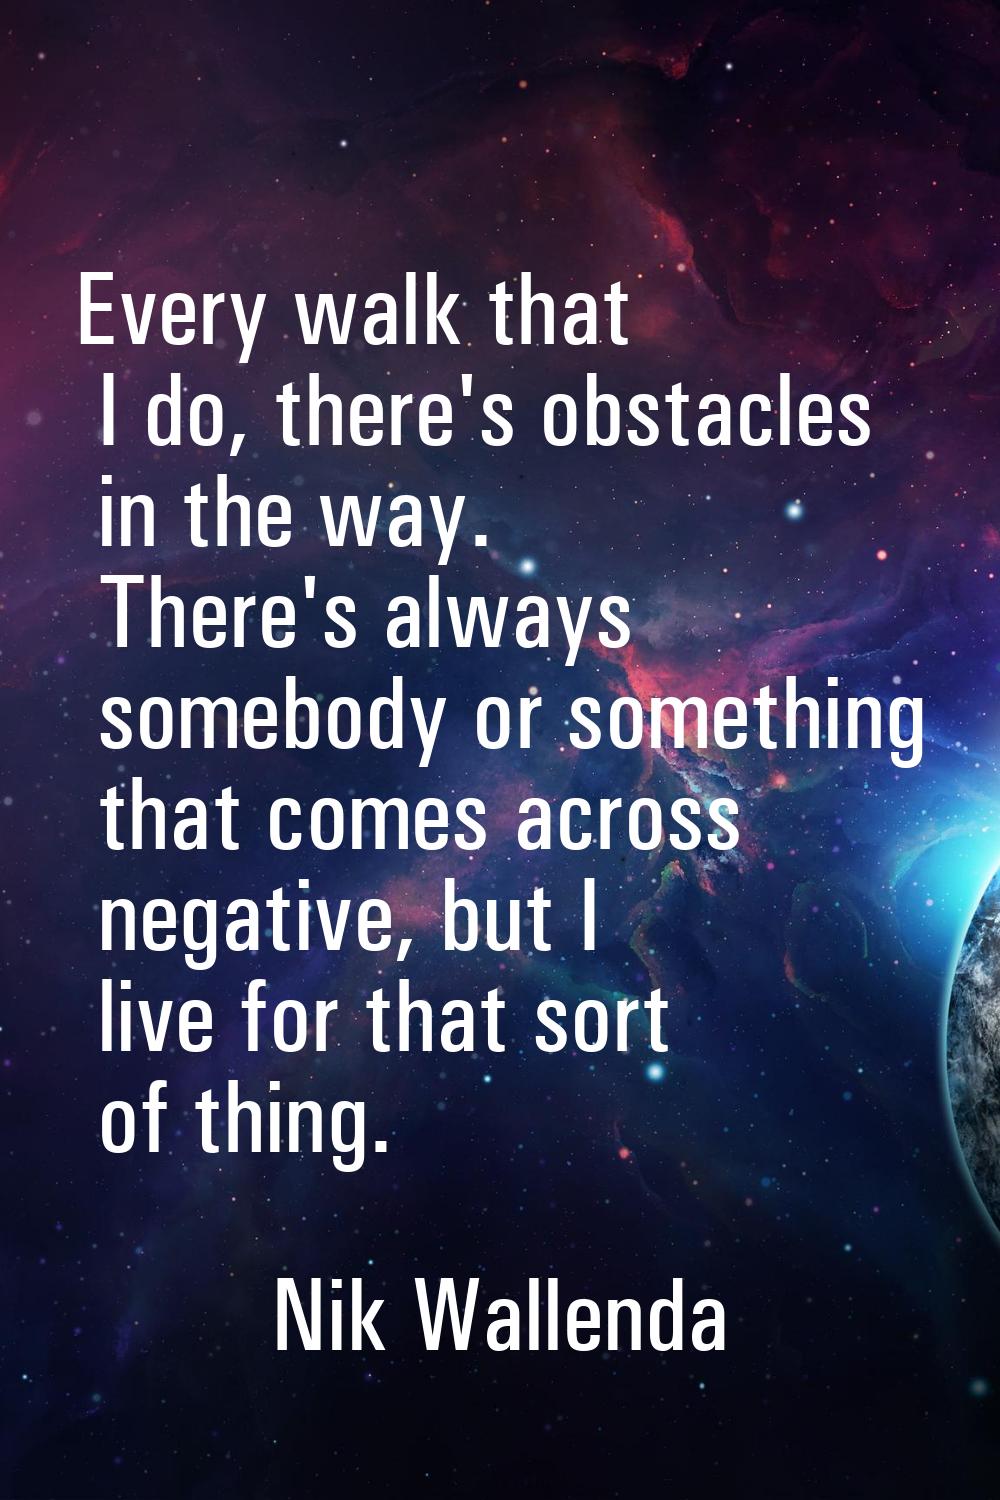 Every walk that I do, there's obstacles in the way. There's always somebody or something that comes